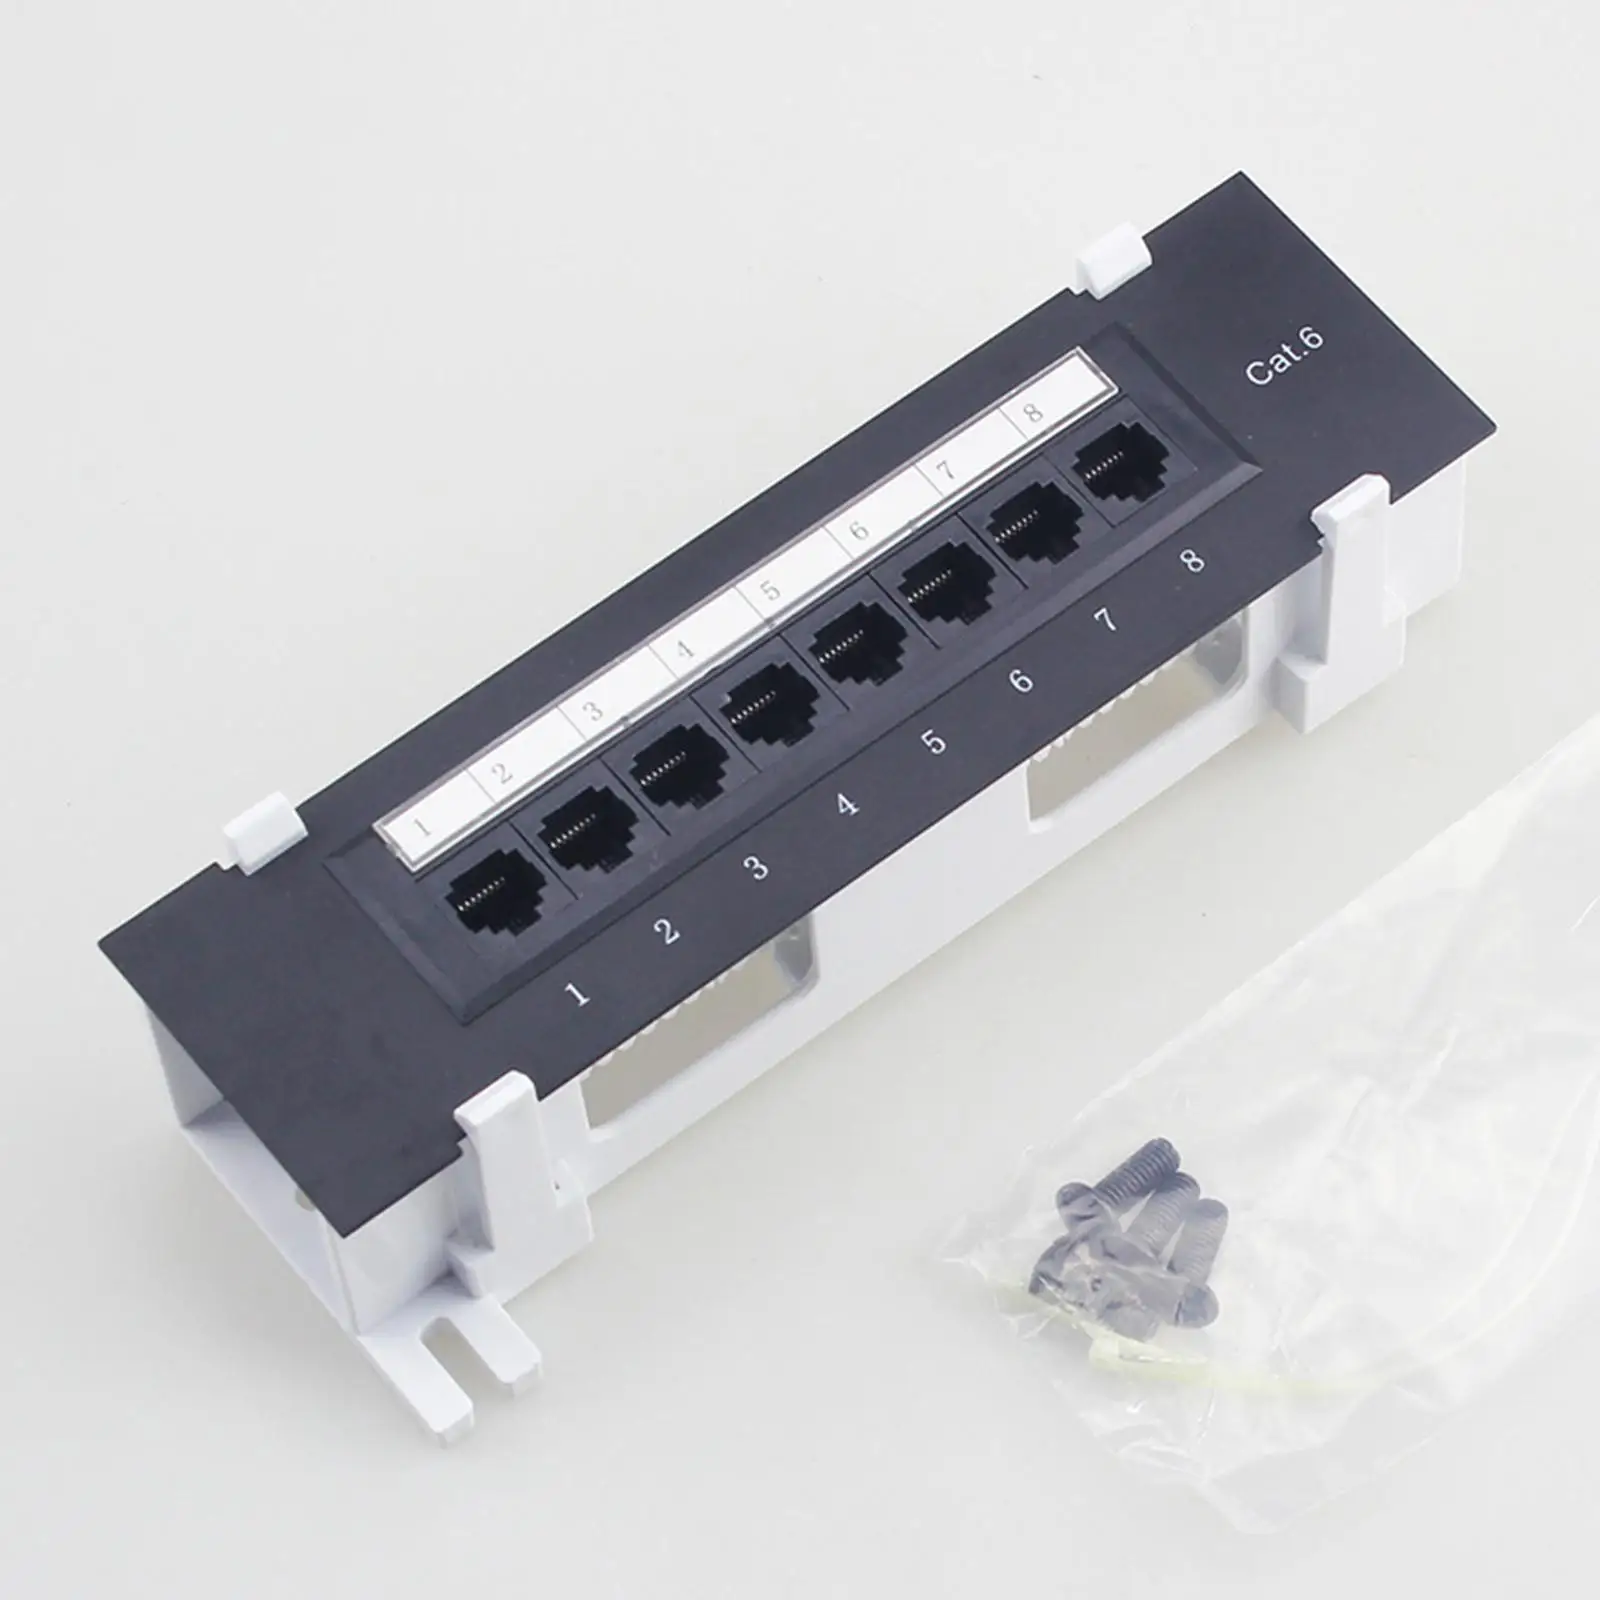 8 Port Shielded Patch Panel for Cat. 6 Installation Cable Network Cable Rack for Server Room for Wiring Home Computer Office